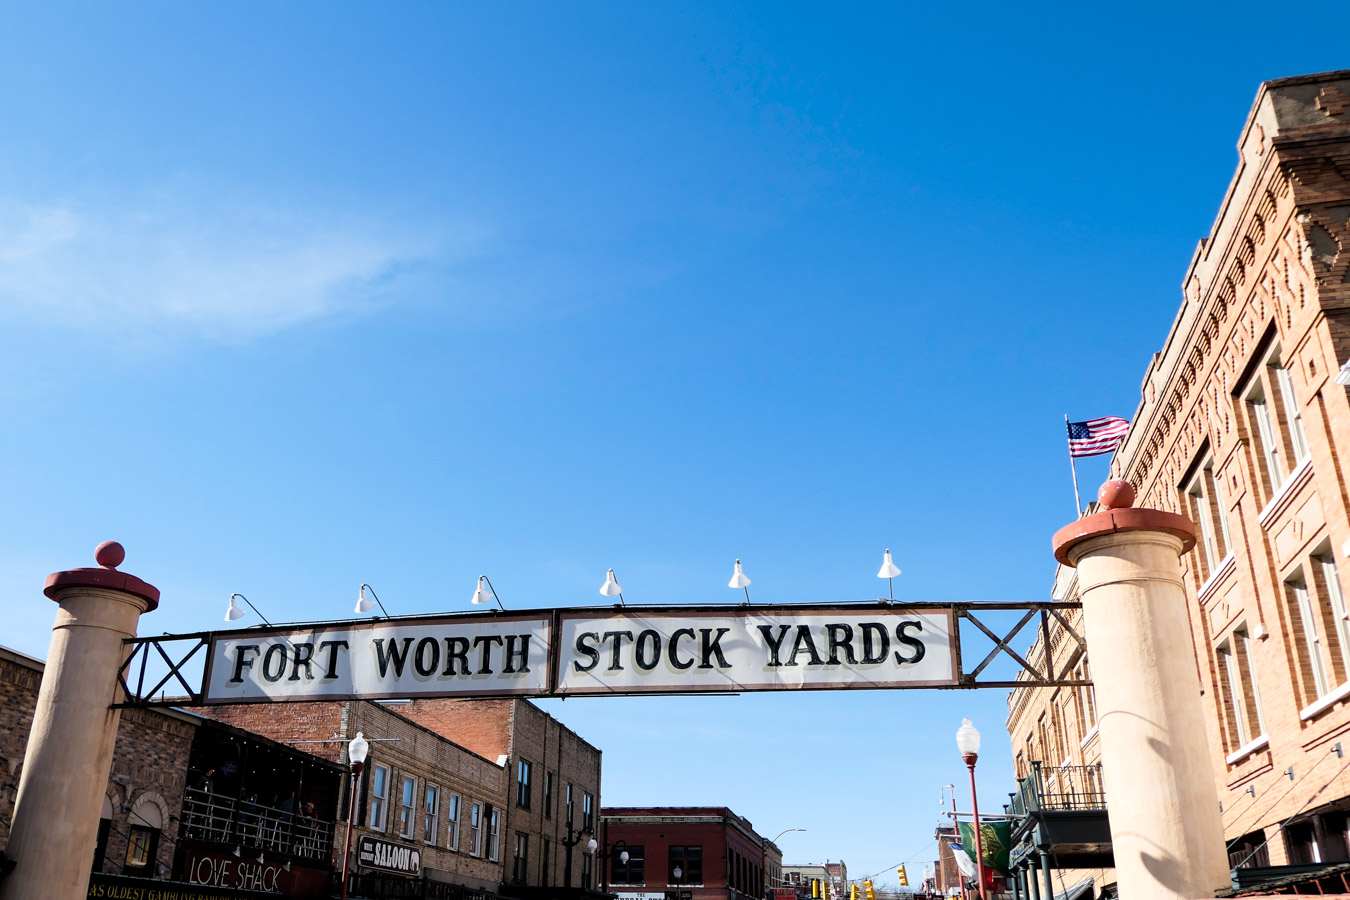 What to Do in Ft. Worth for 1 Day Travel Guide - Where to Eat - Ft. Worth Stock Yards